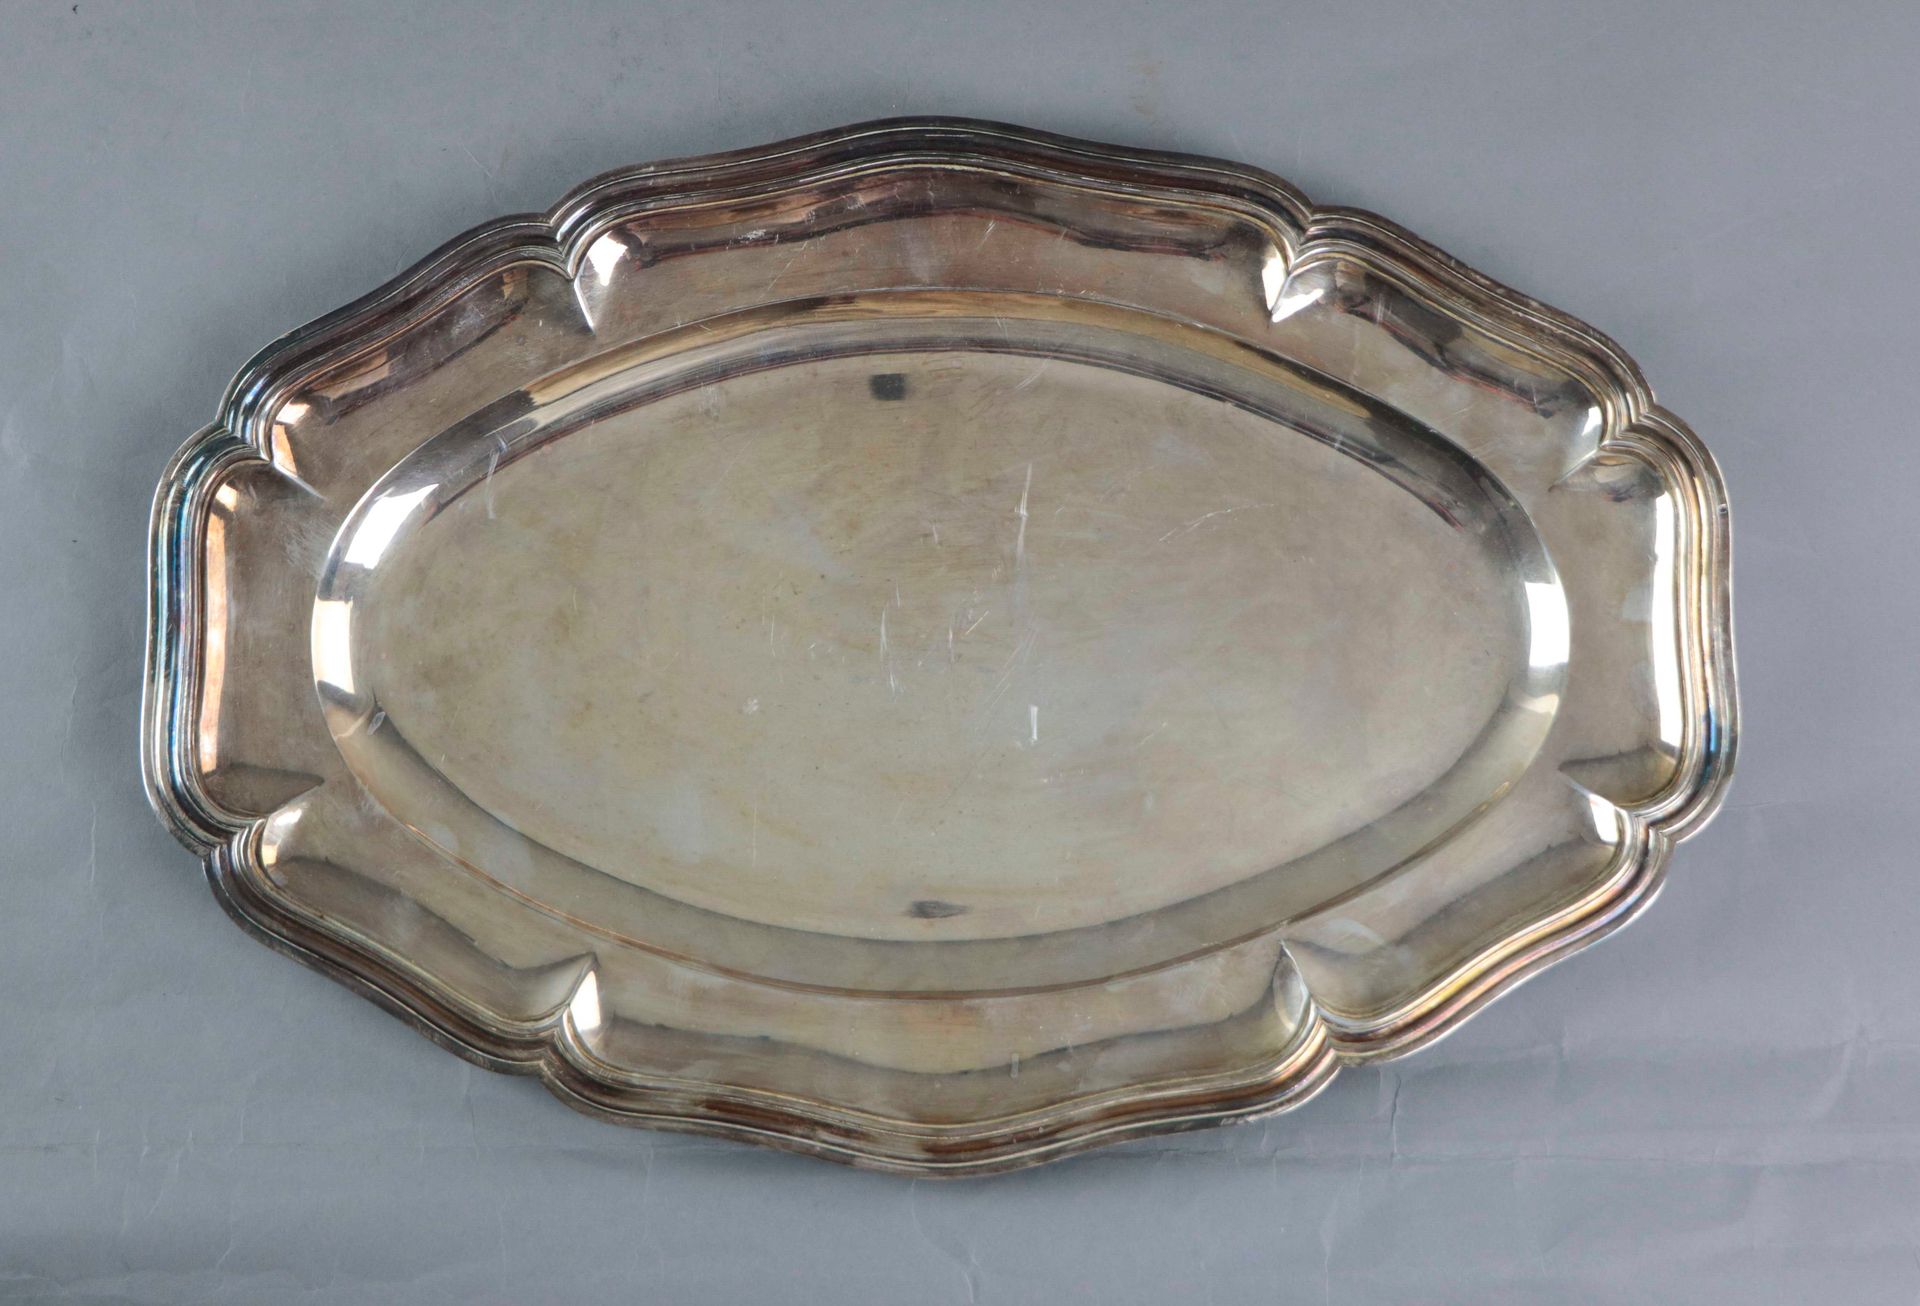 Null Oval silver serving dish. 1 kg 310 g approximately